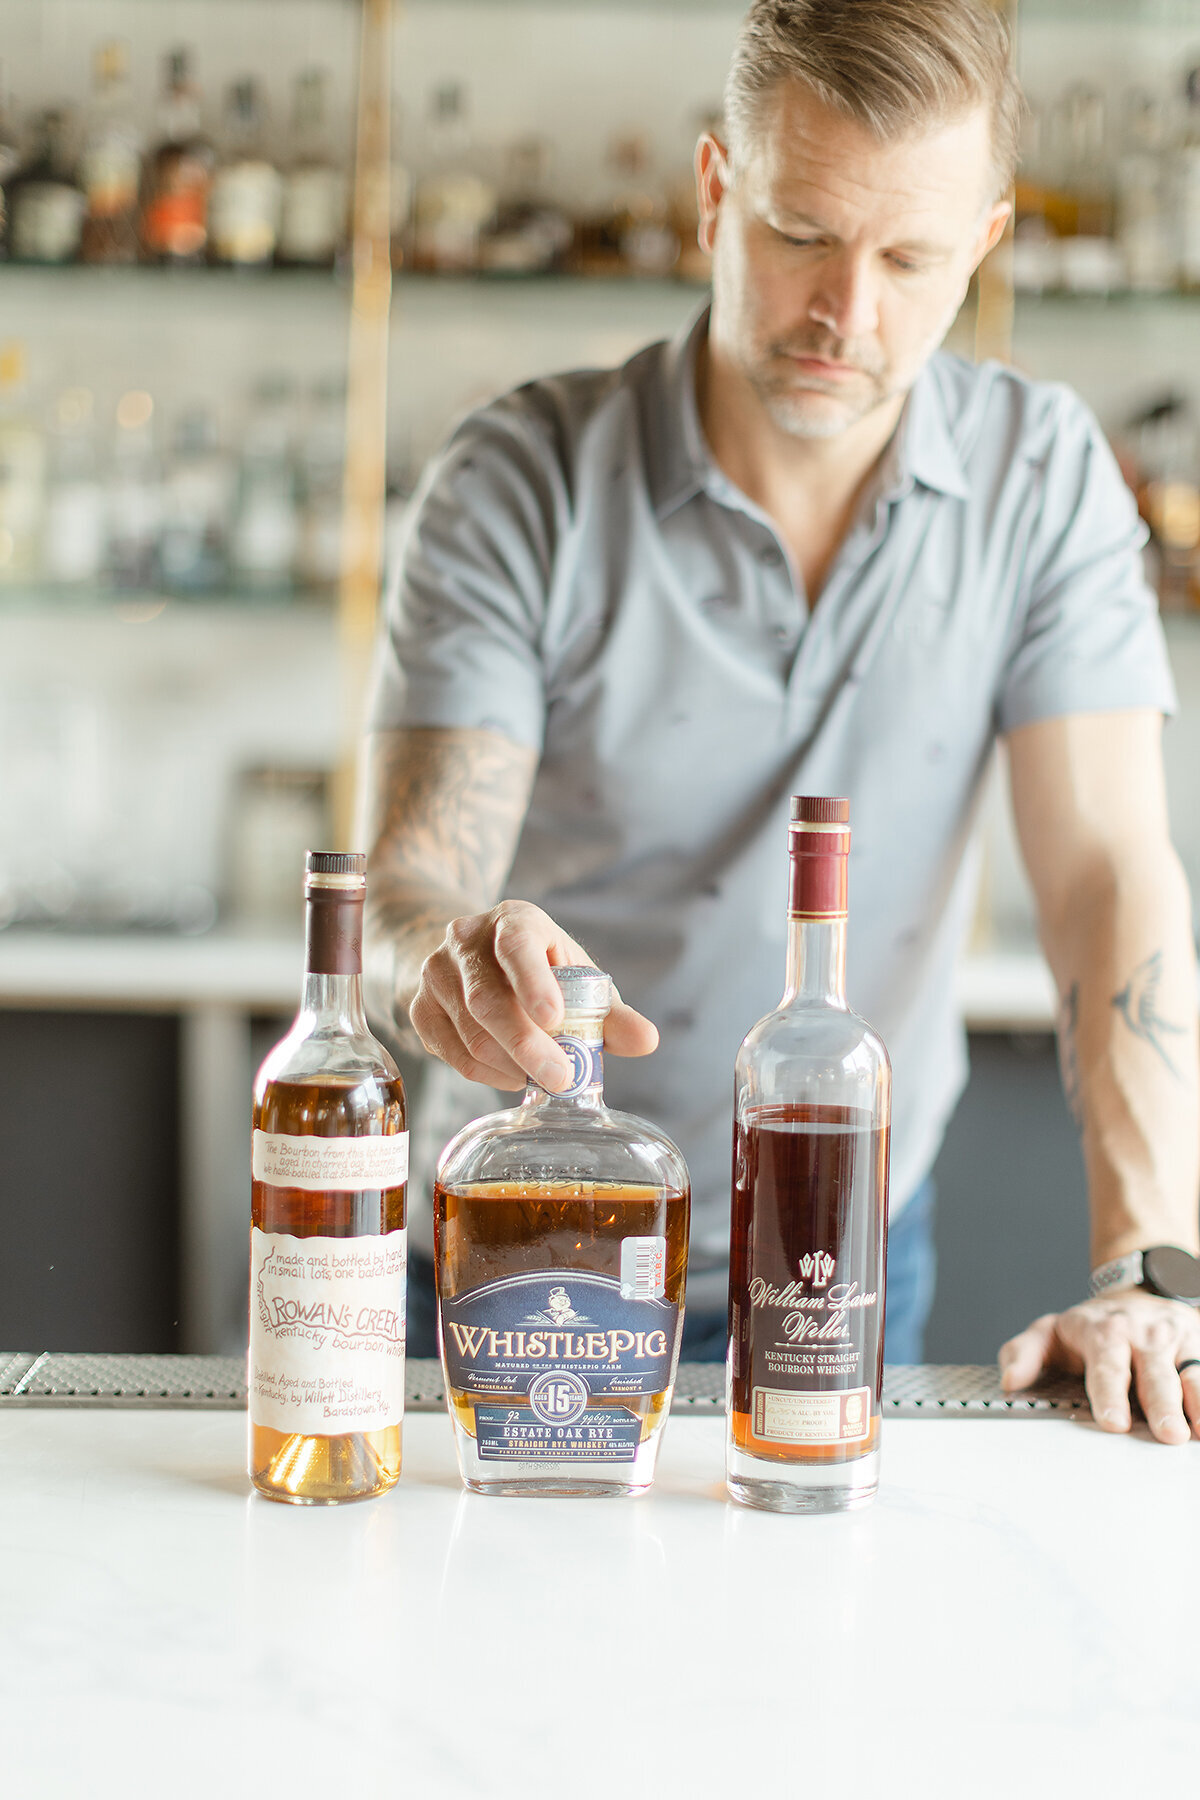 Professional headshot of a Dallas/Fort Worth business owner at his new restaurant Sip and Savor as he stands at the bar holding a bottle of alcohol.